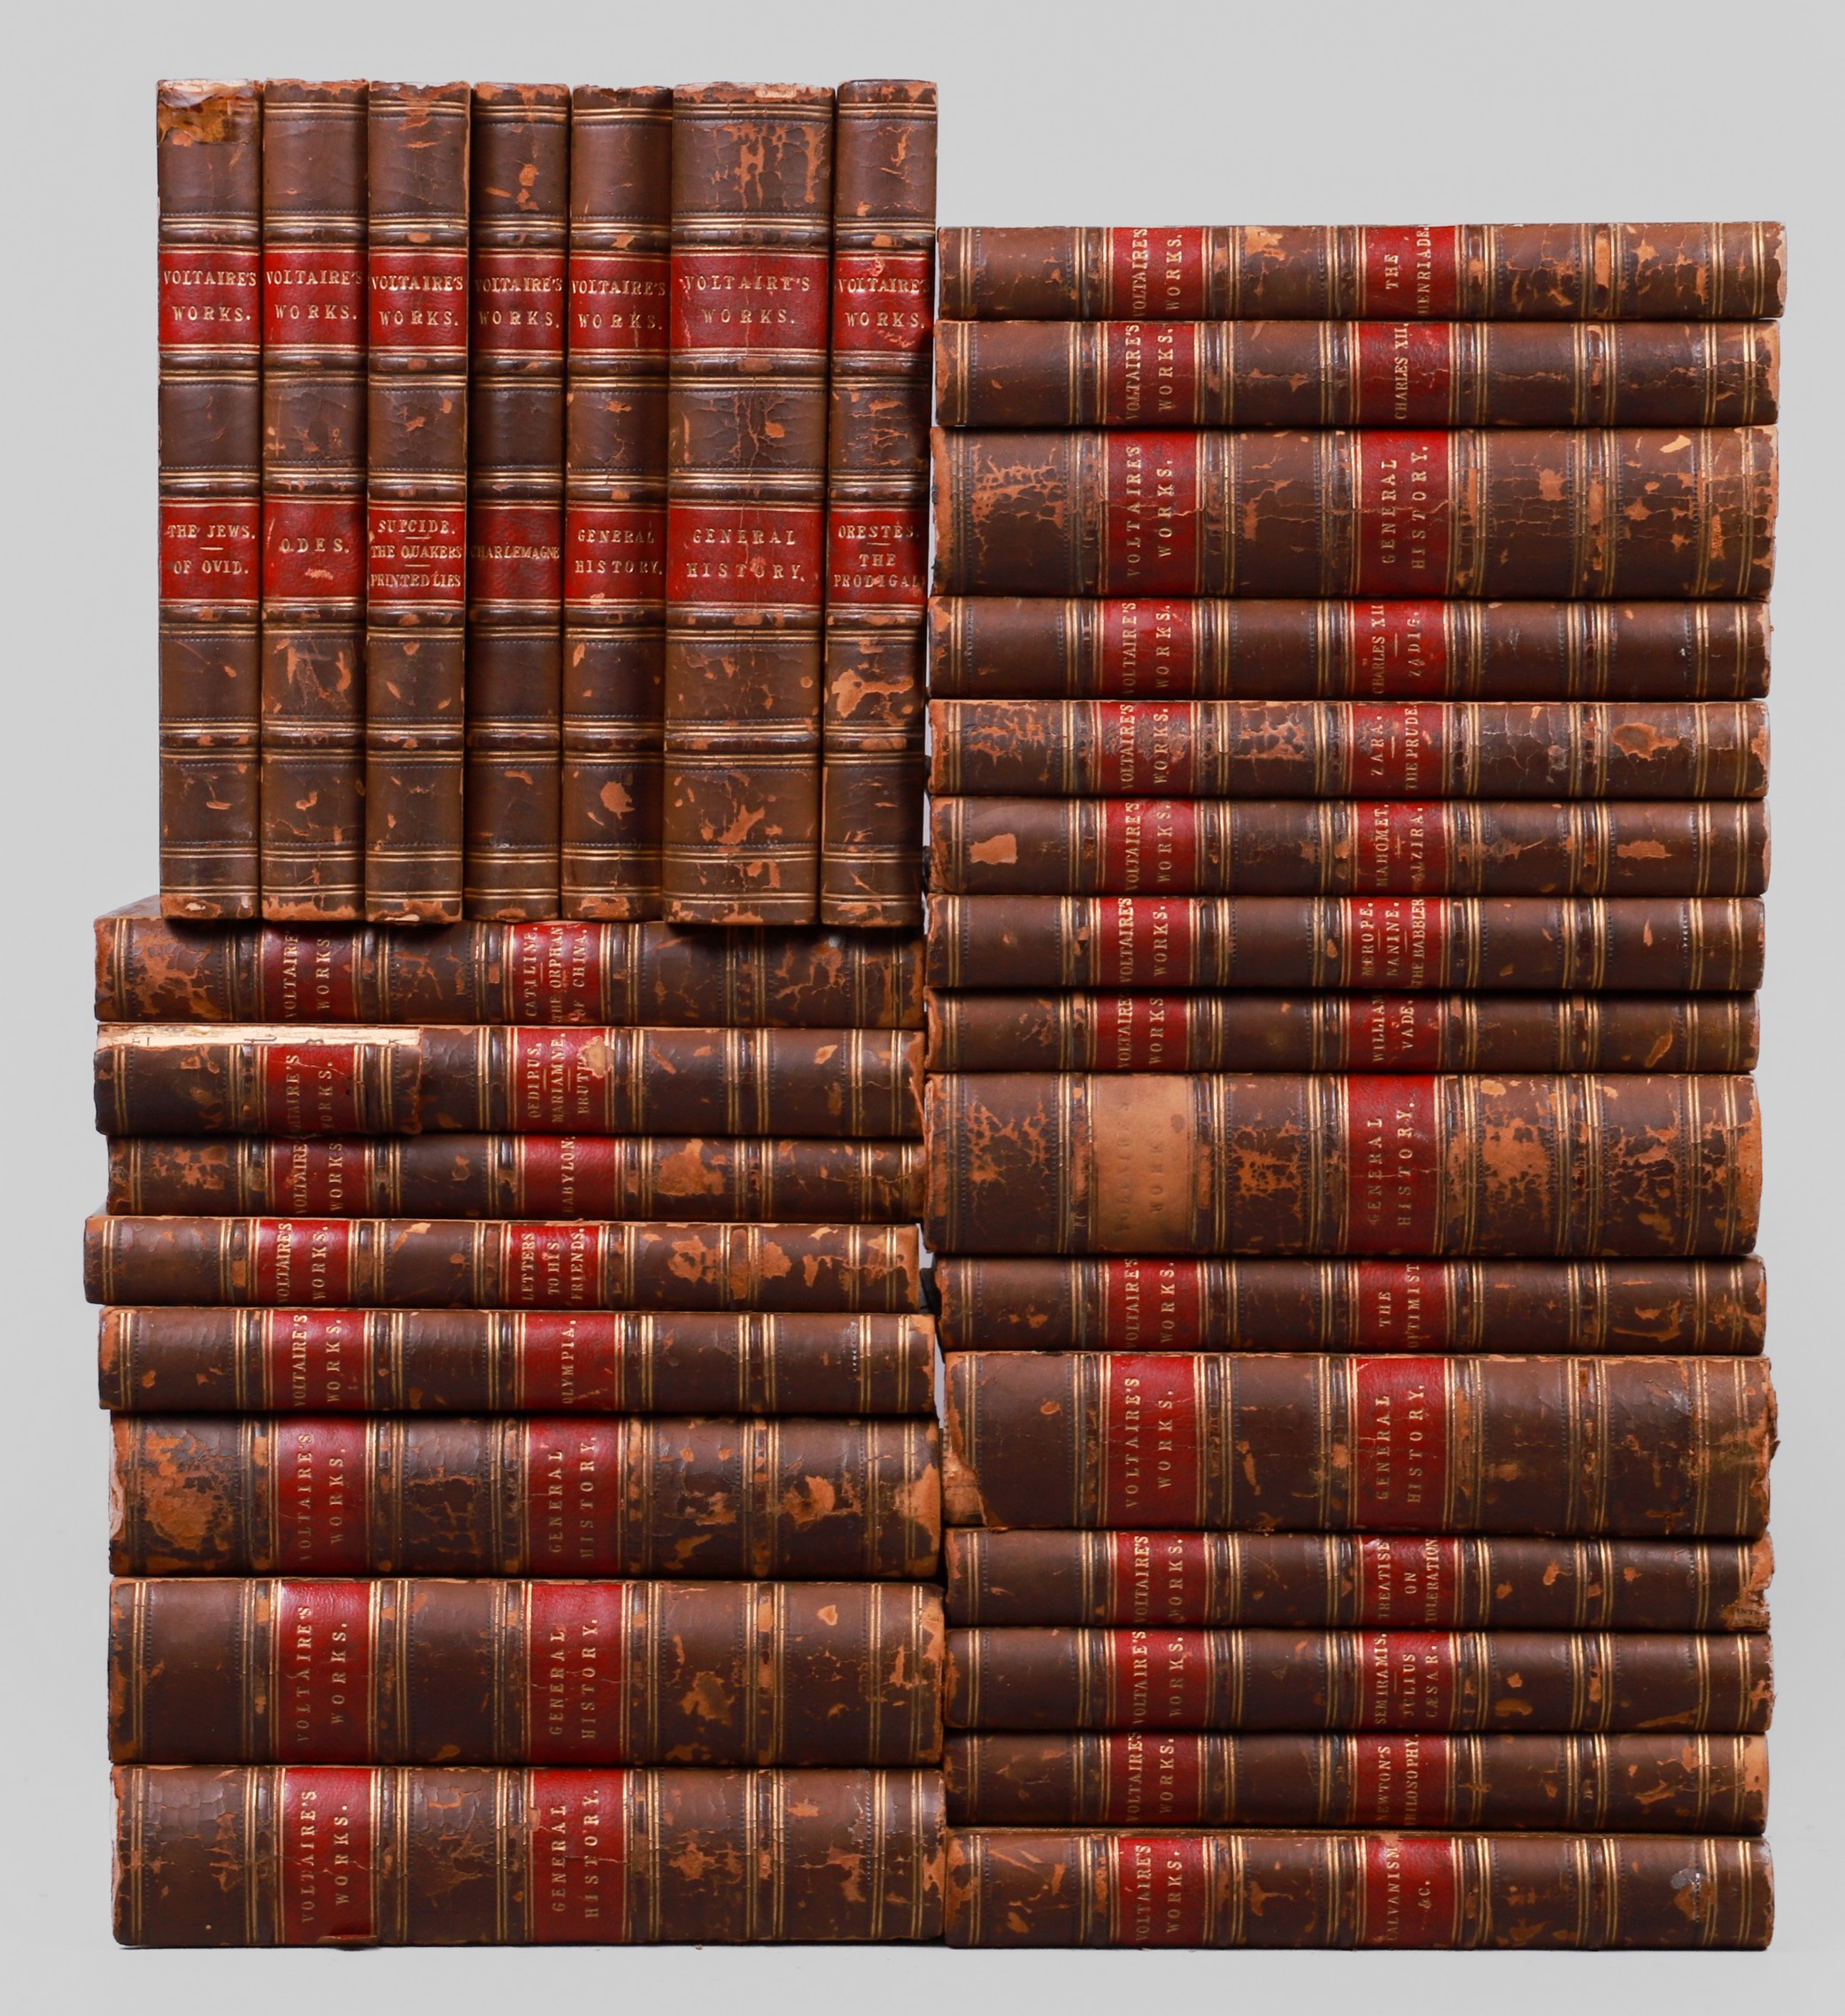 Thirty volumes from a set of the 3b65ea